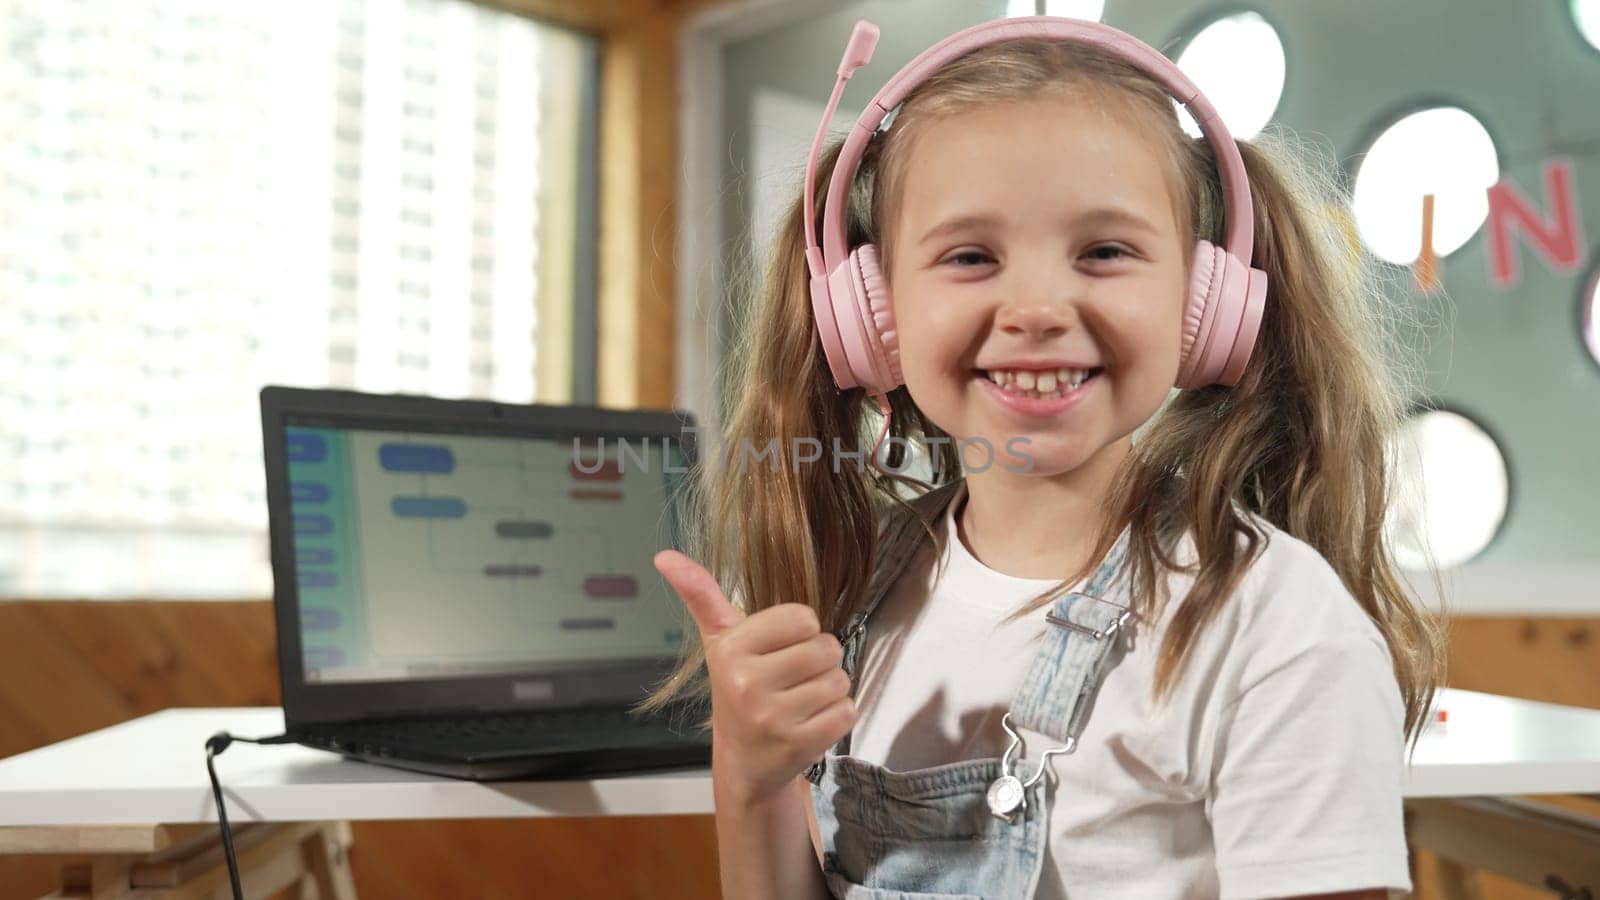 Closeup of caucasian girl smiling to camera while showing a thumb up gesture. Young child wearing headphone and casual dress standing while looking at camera with satisfy, happy, joyful. Erudition.